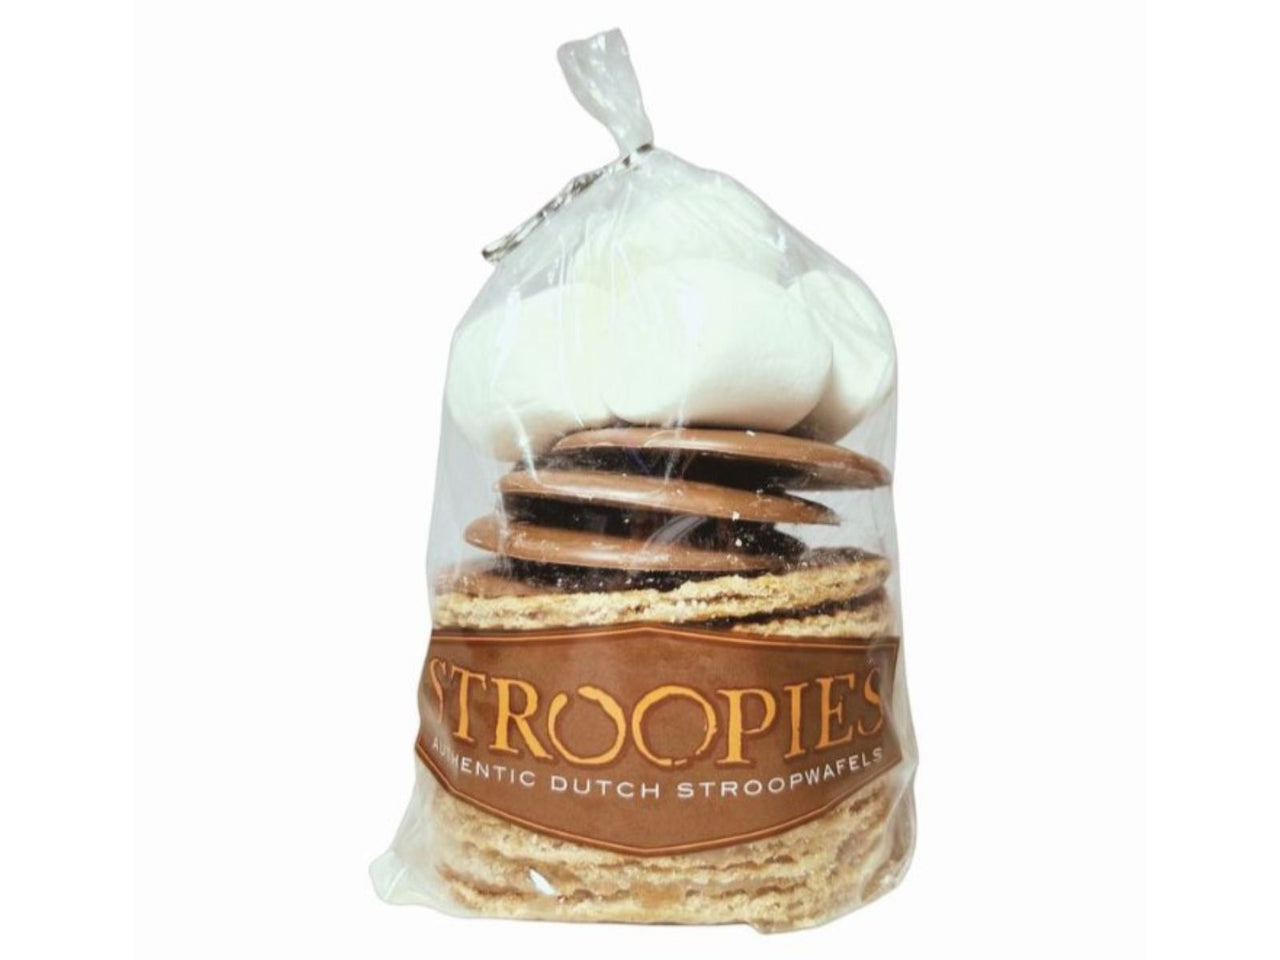 Stroopies - S'mores Kit - (Family Pack)